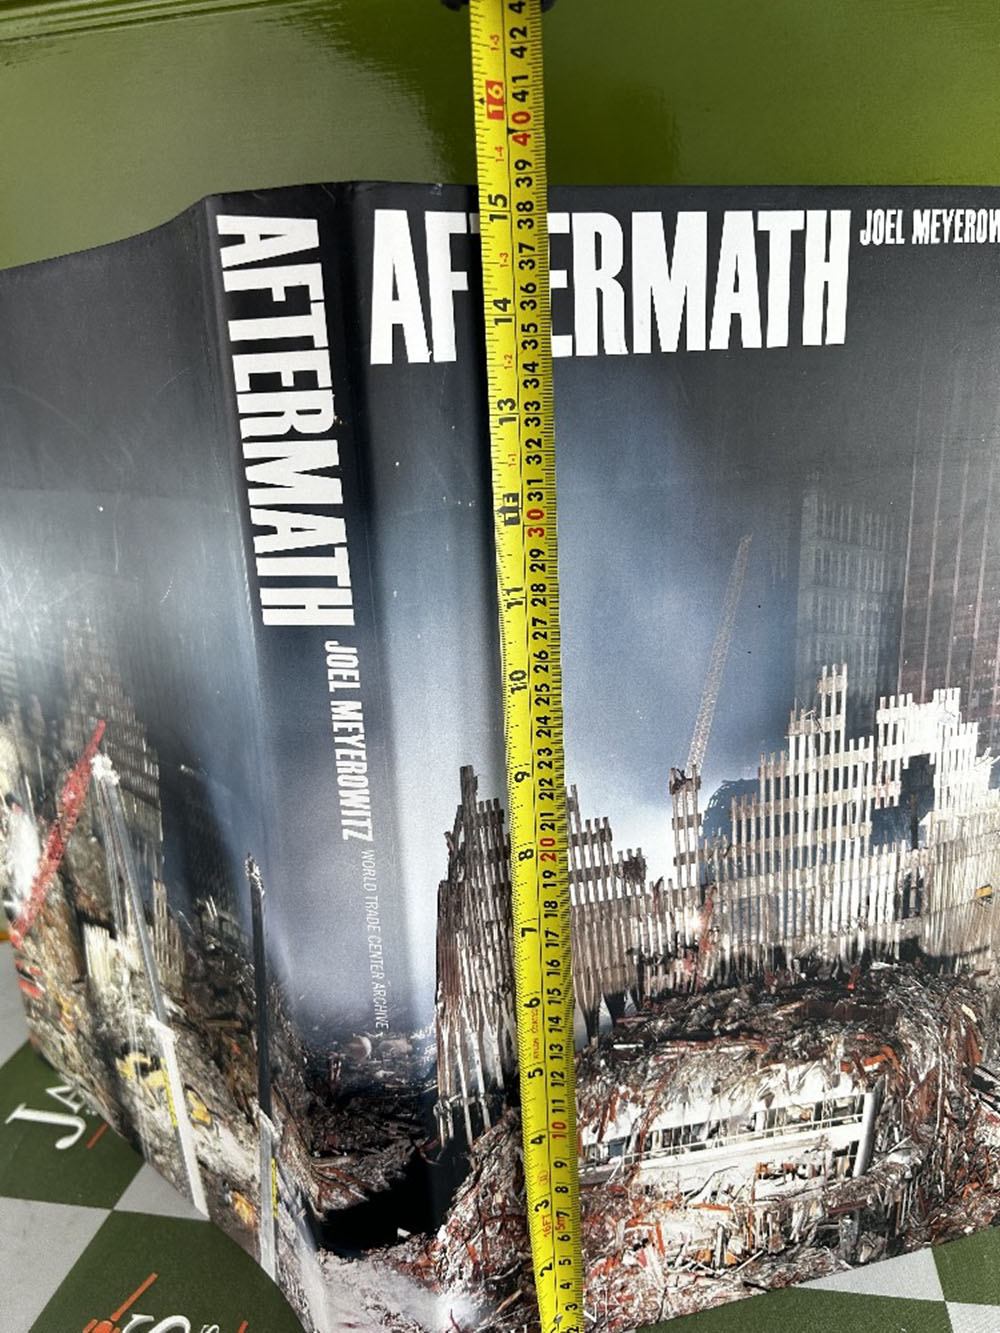 The Aftermath &#8211; Twin Tower Large Hardback Pictorial Book - Image 9 of 10